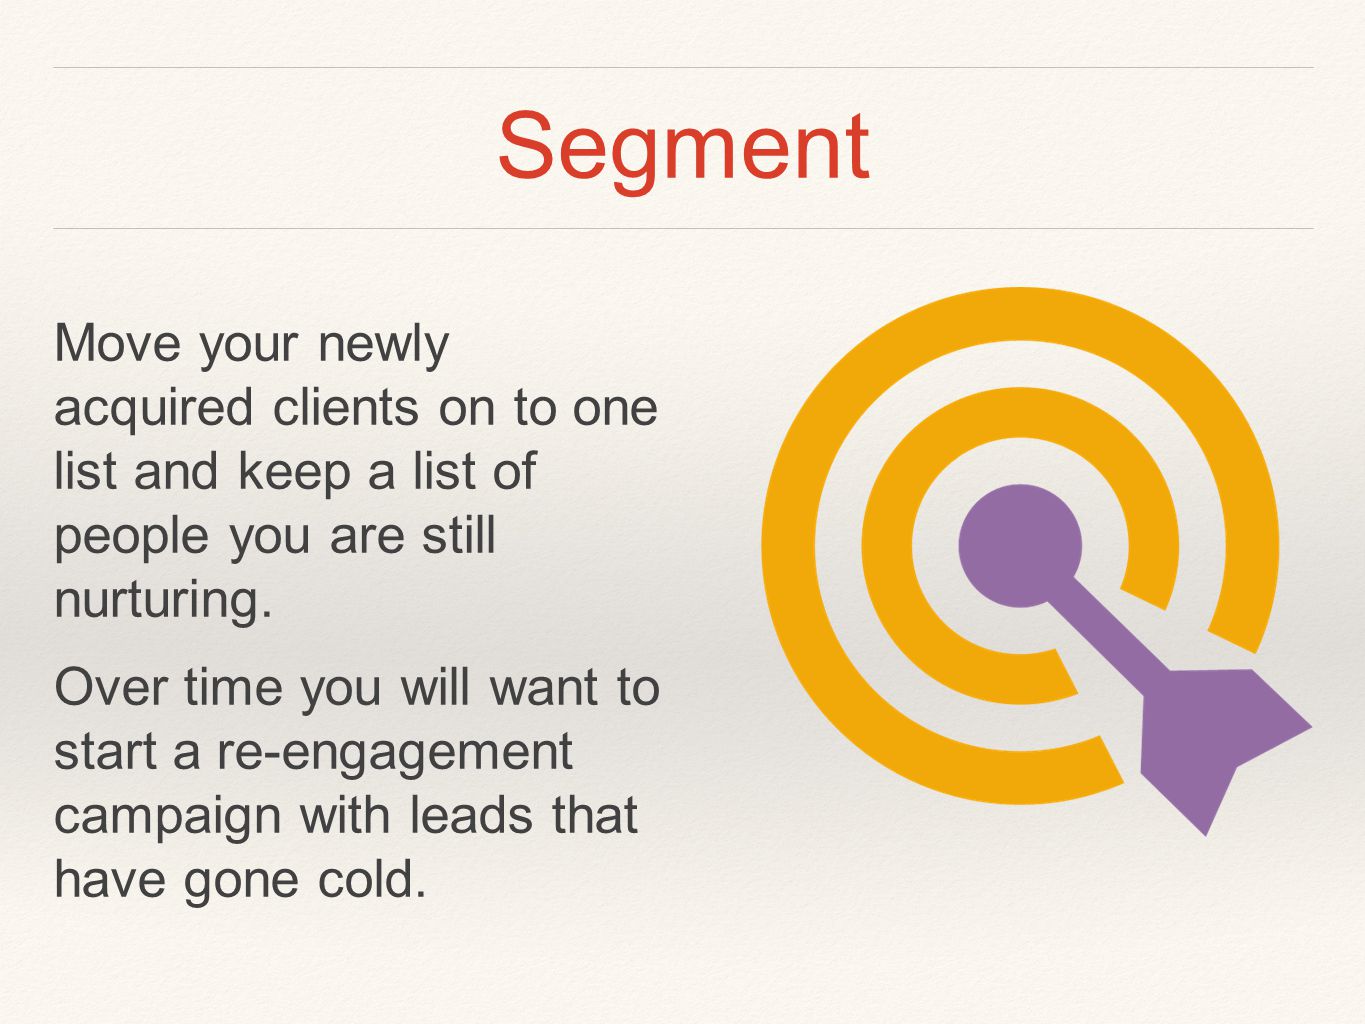 Segment Move your newly acquired clients on to one list and keep a list of people you are still nurturing.